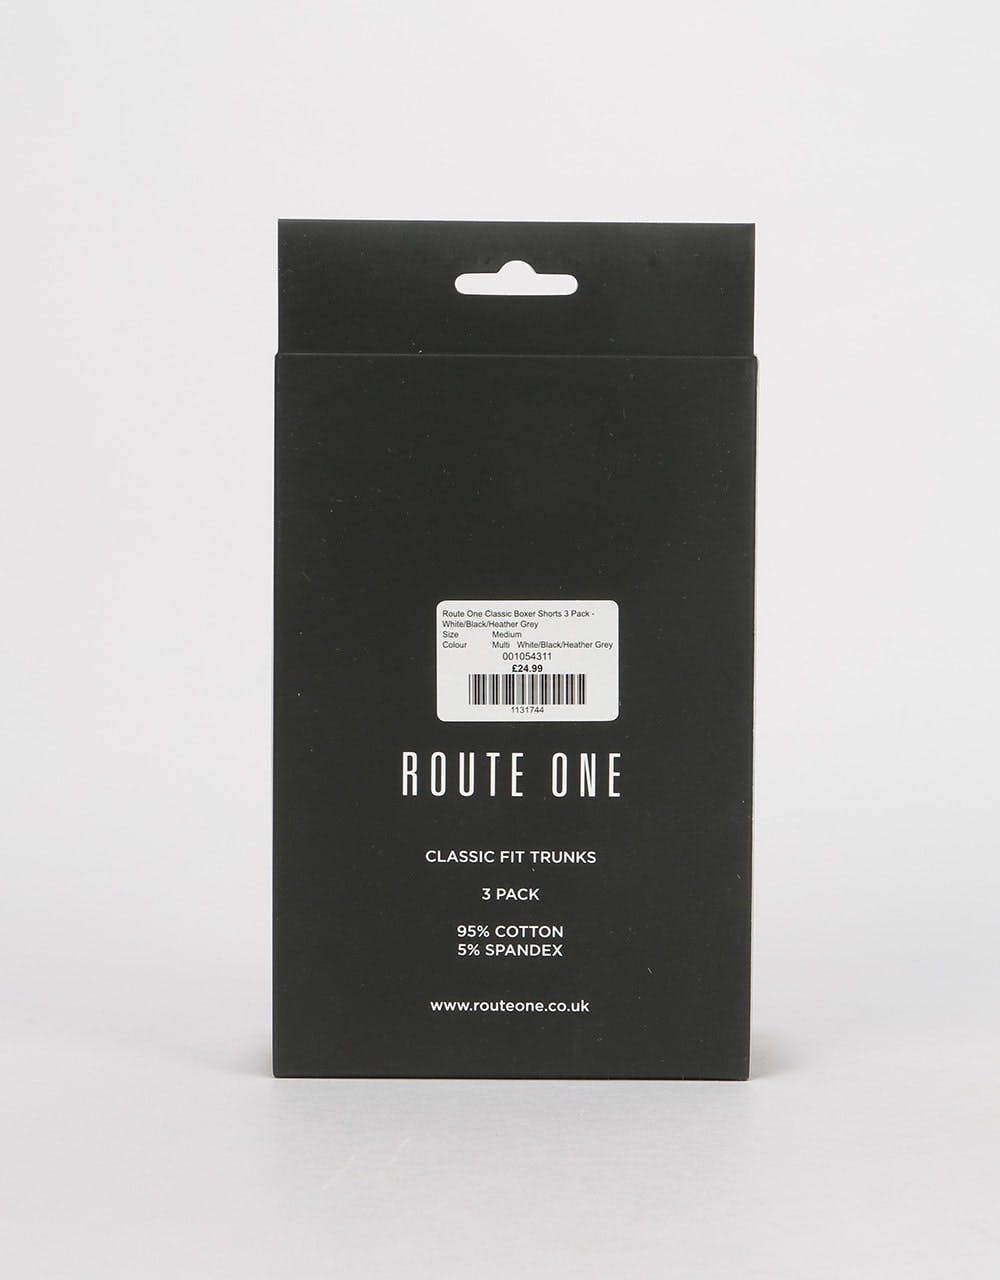 Route One Classic Boxer Shorts 3 Pack - White /Black/Heather Grey